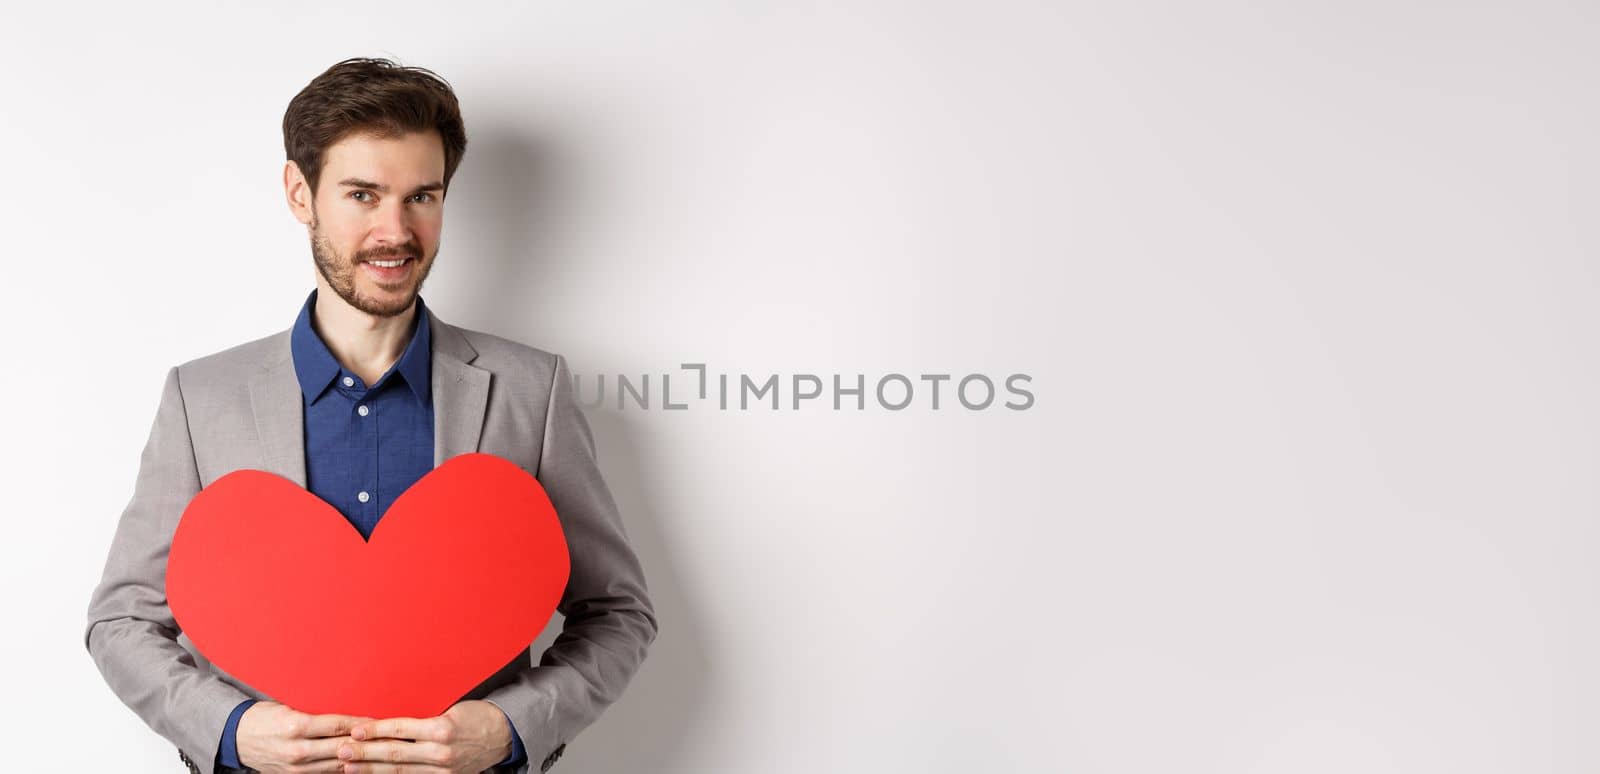 Handsome bearded man wishing happy valentines day, holding red heart cutout and smiling, going on romantic date in fancy suit, standing over white background by Benzoix